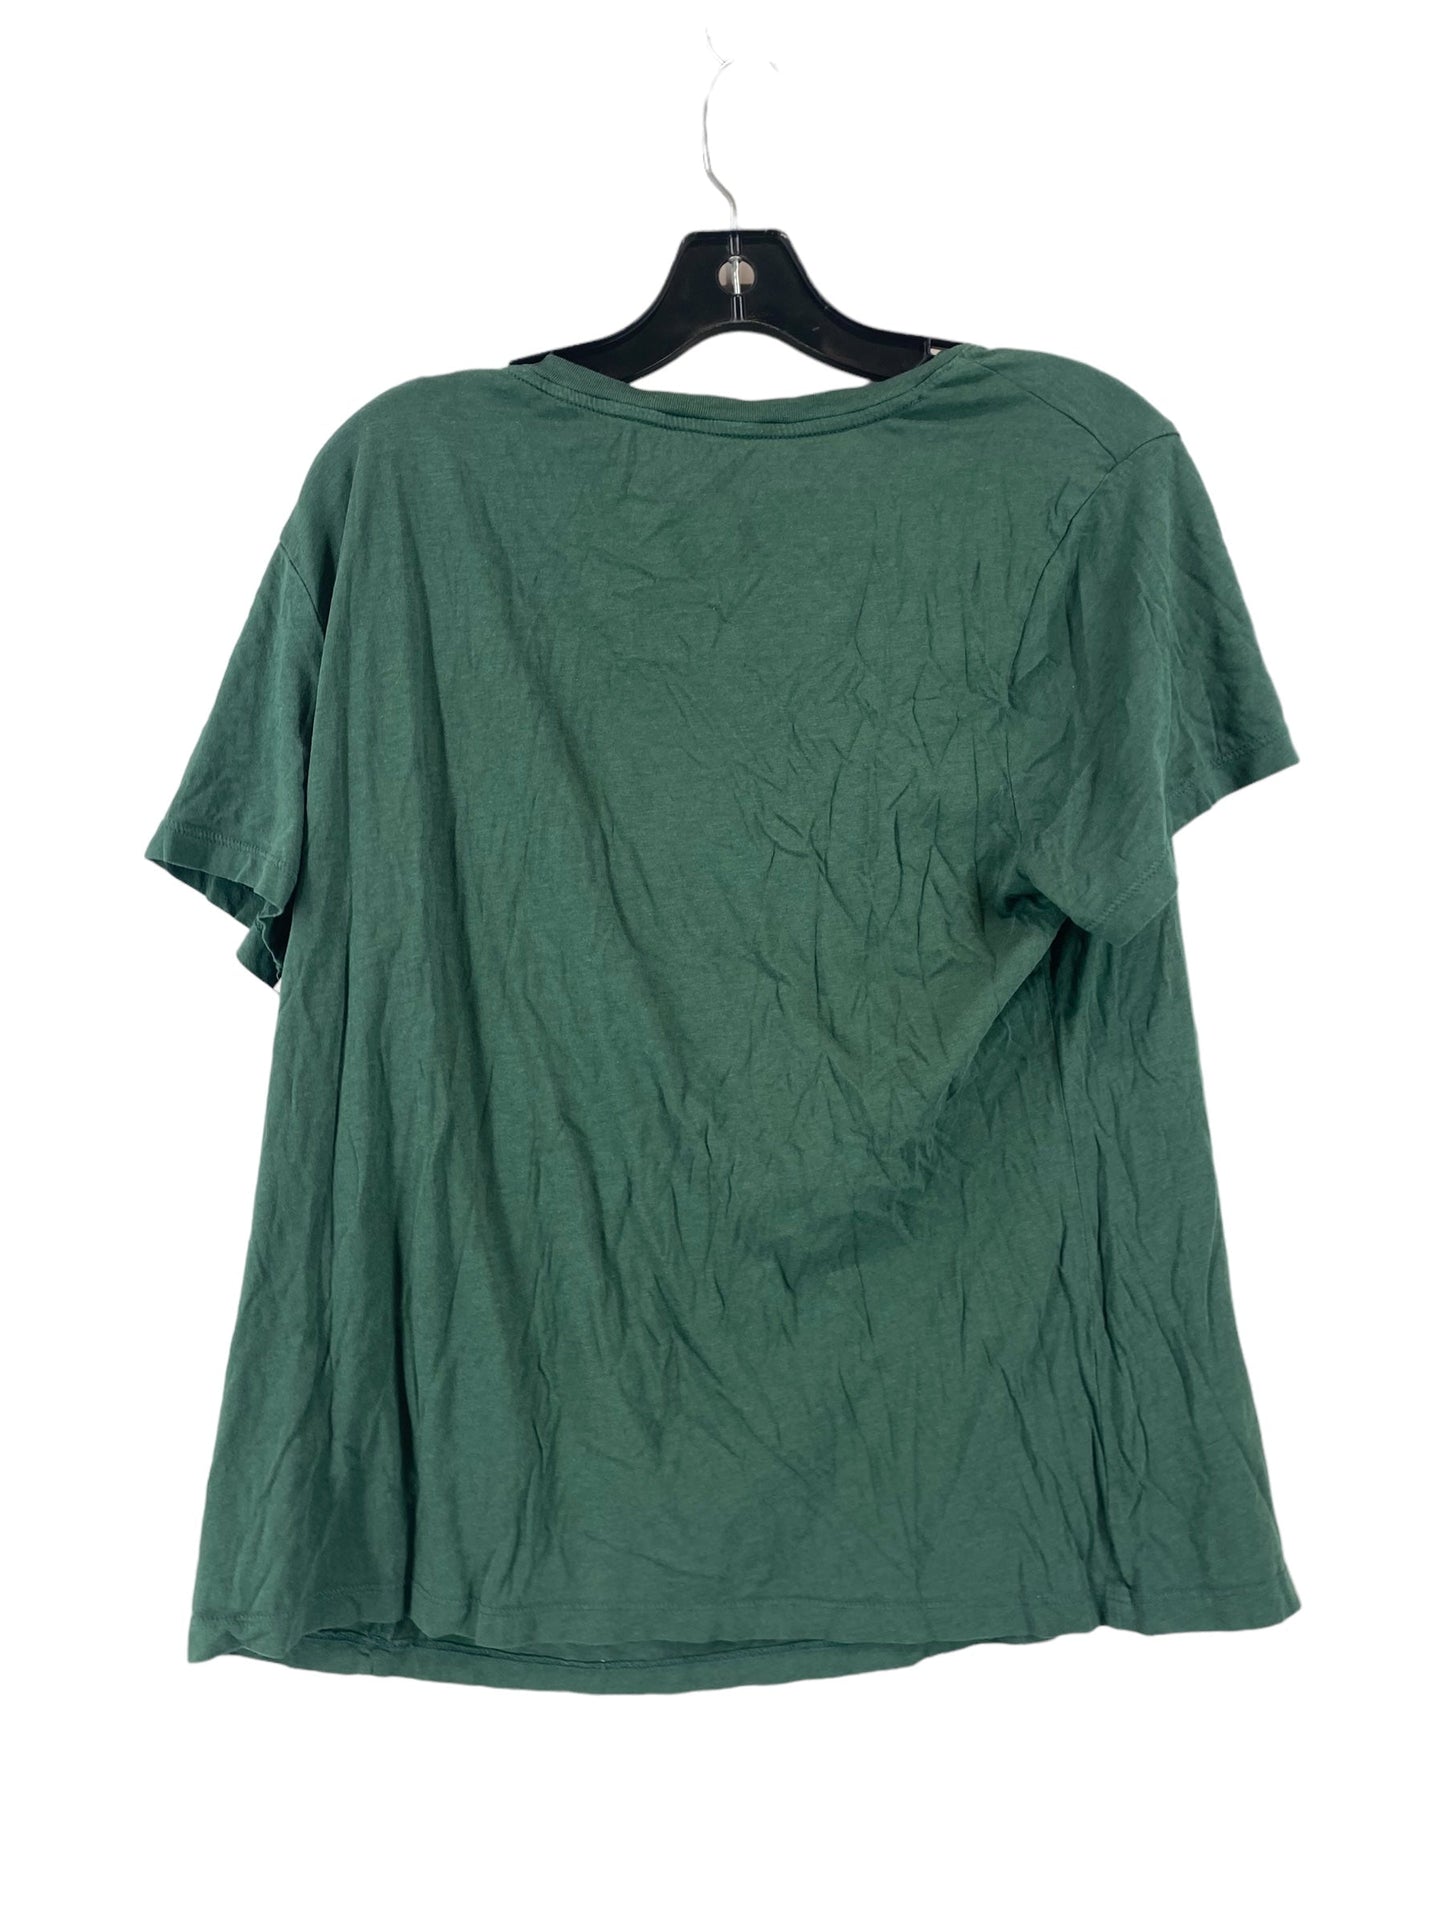 Green Top Short Sleeve Basic A New Day, Size 2x